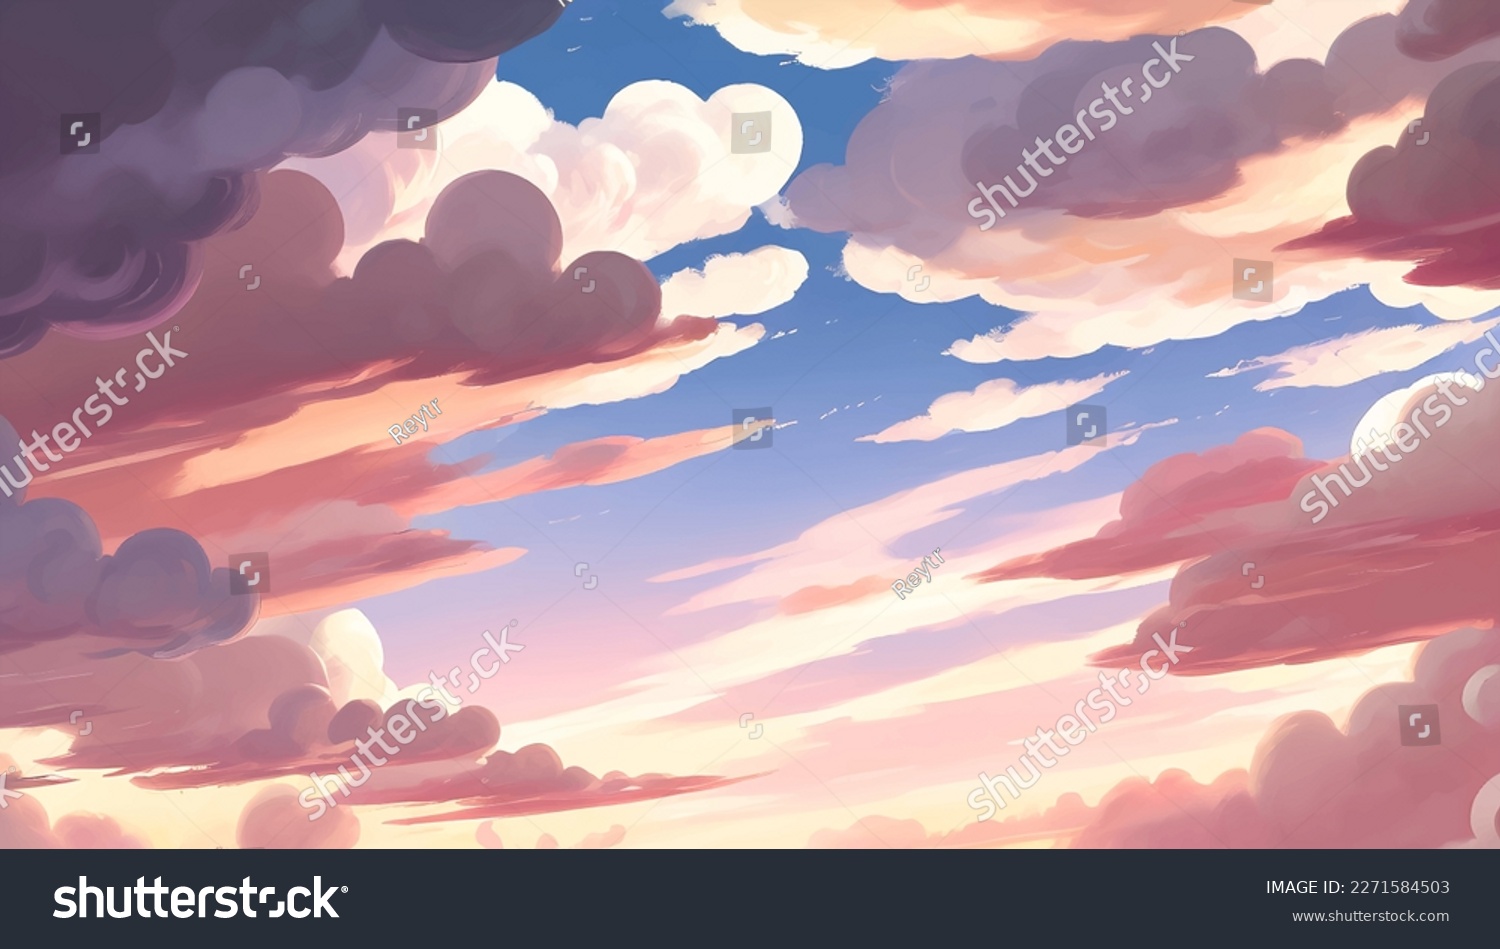 Clouds in The Sky Background During Golden Hour of Sunrise or Sunset Hand Drawn Painting Illustration #2271584503